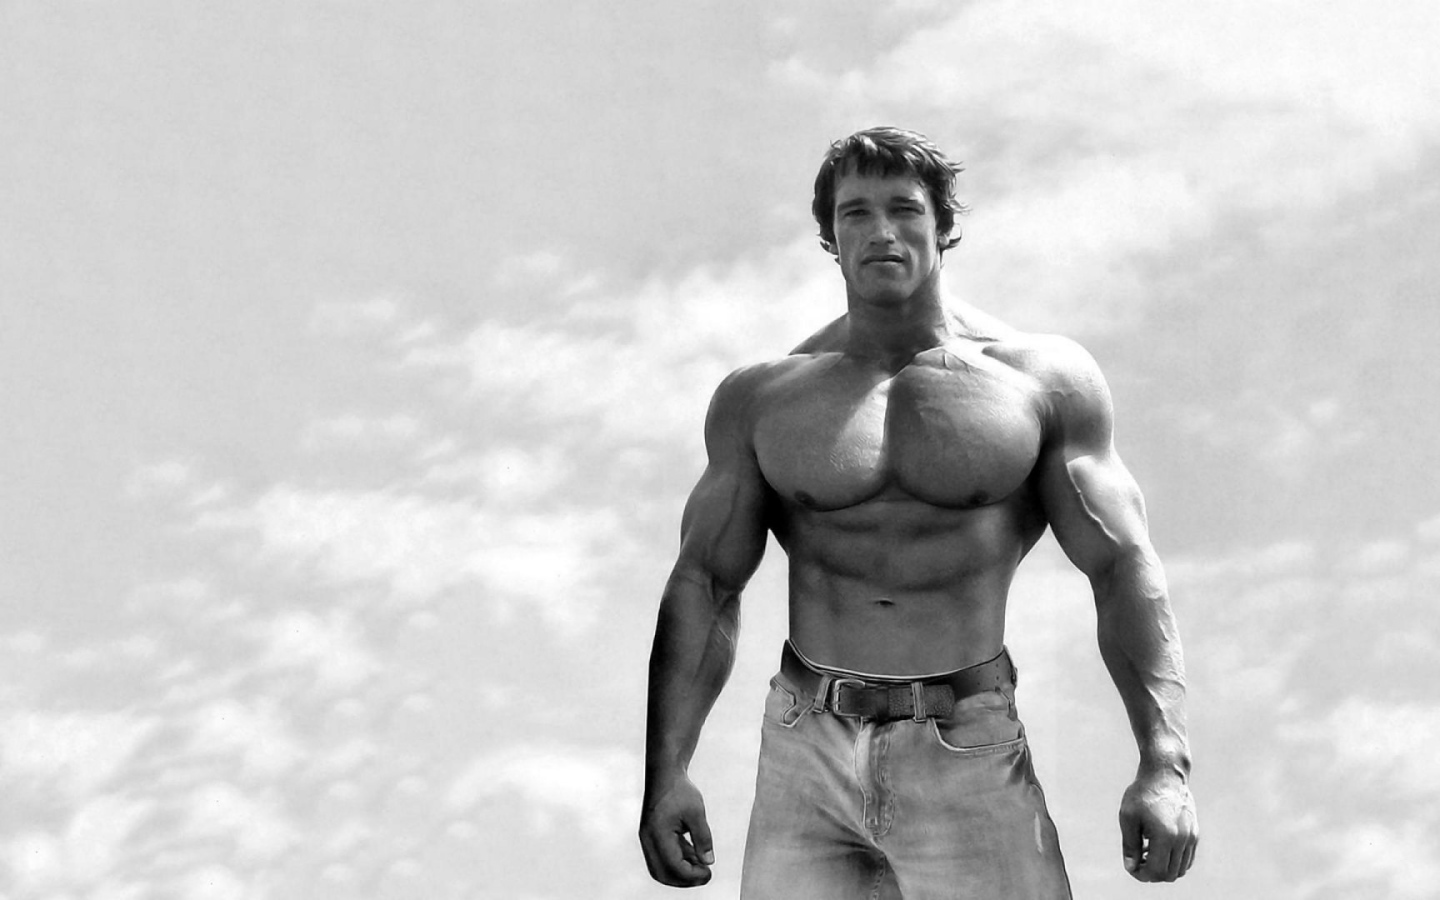 Arnold Schwarzenegger in his youth